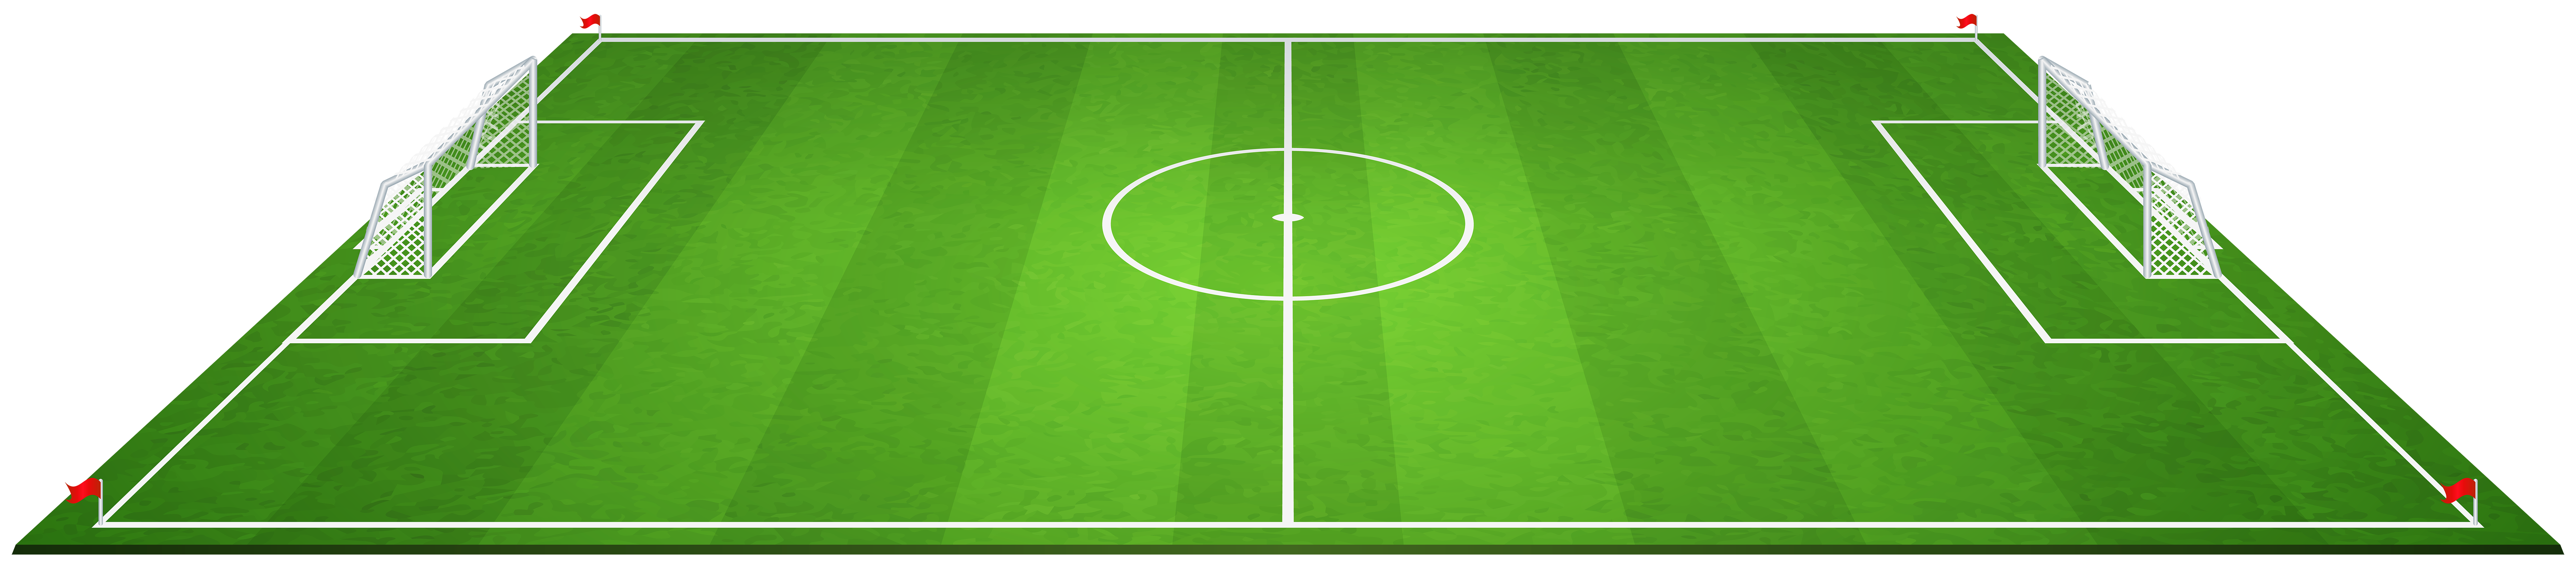 Soccer Field Transparent PNG Image | Gallery Yopriceville ...